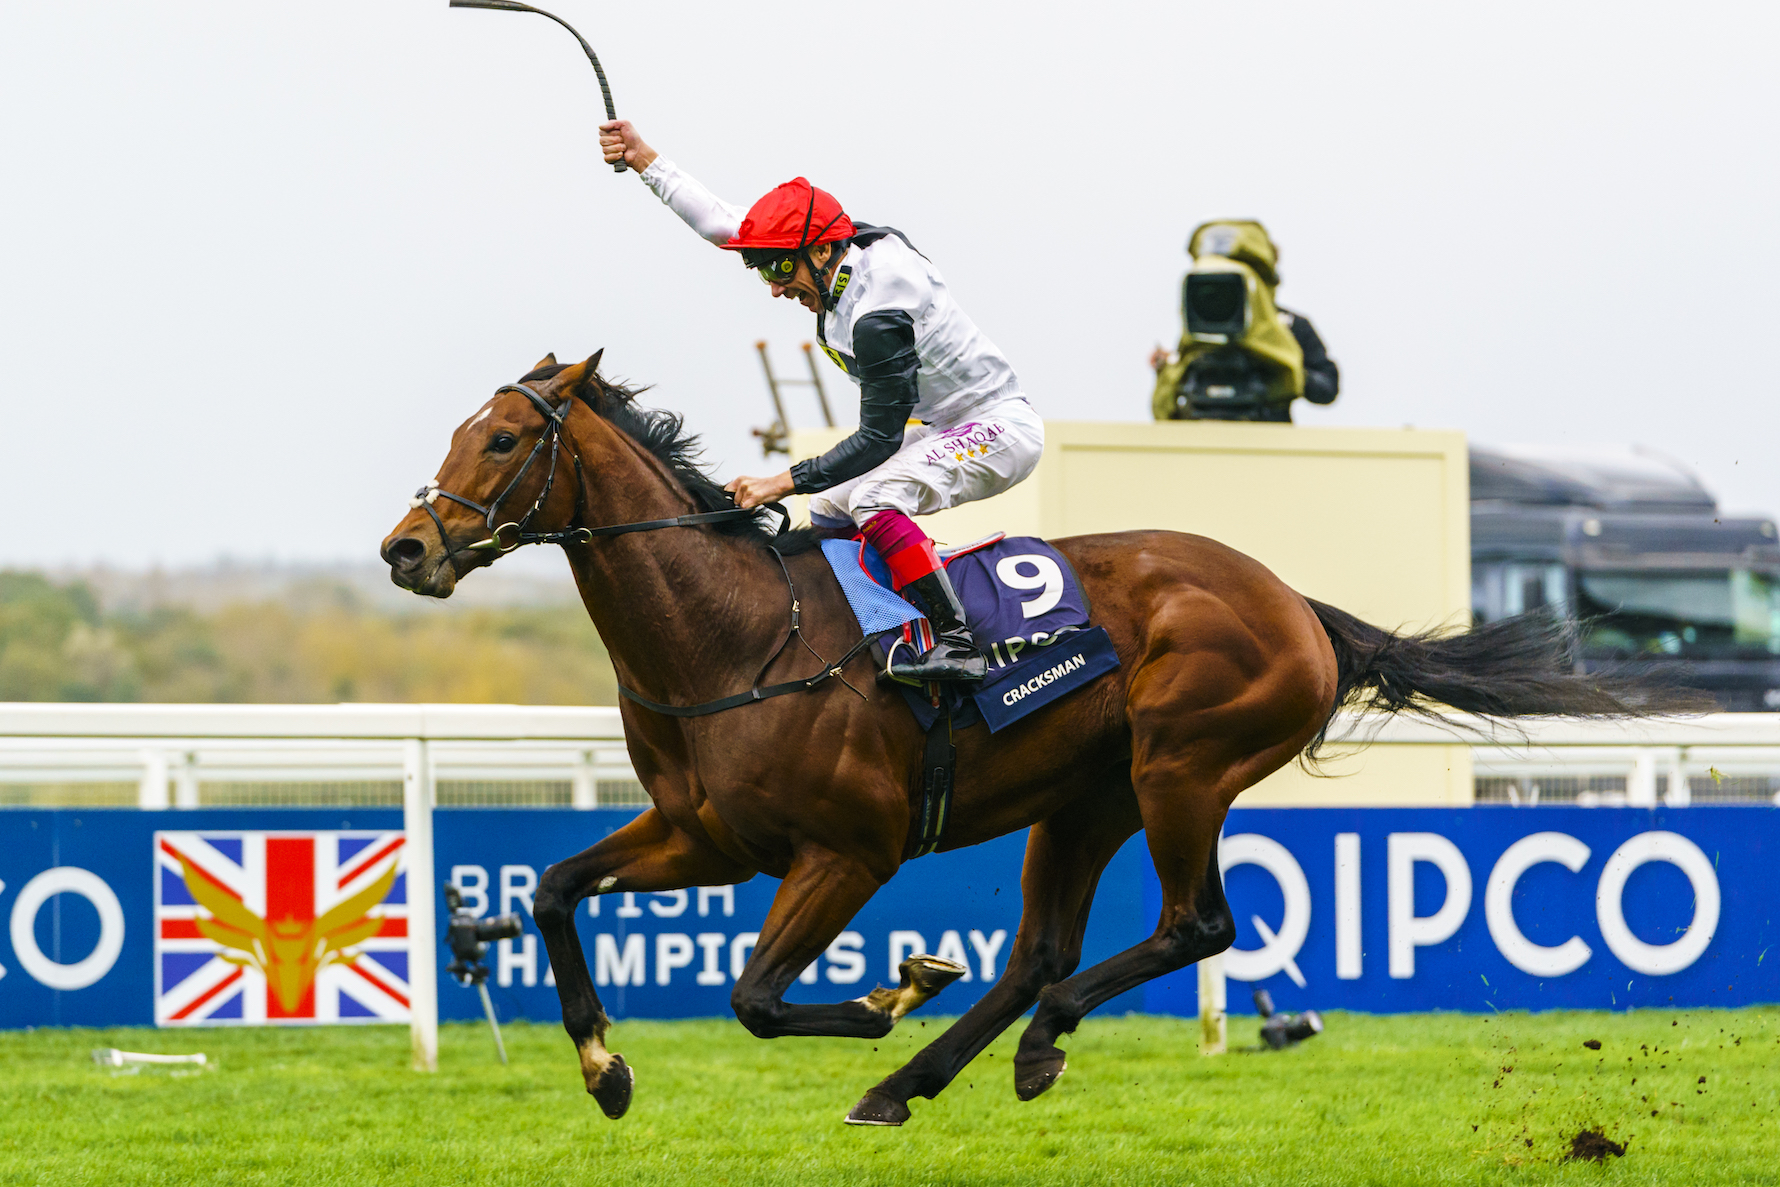 Remarkable spectacle: Cracksman produced the highest-rated performance in Europe last season in the Qipco Champion Stakes